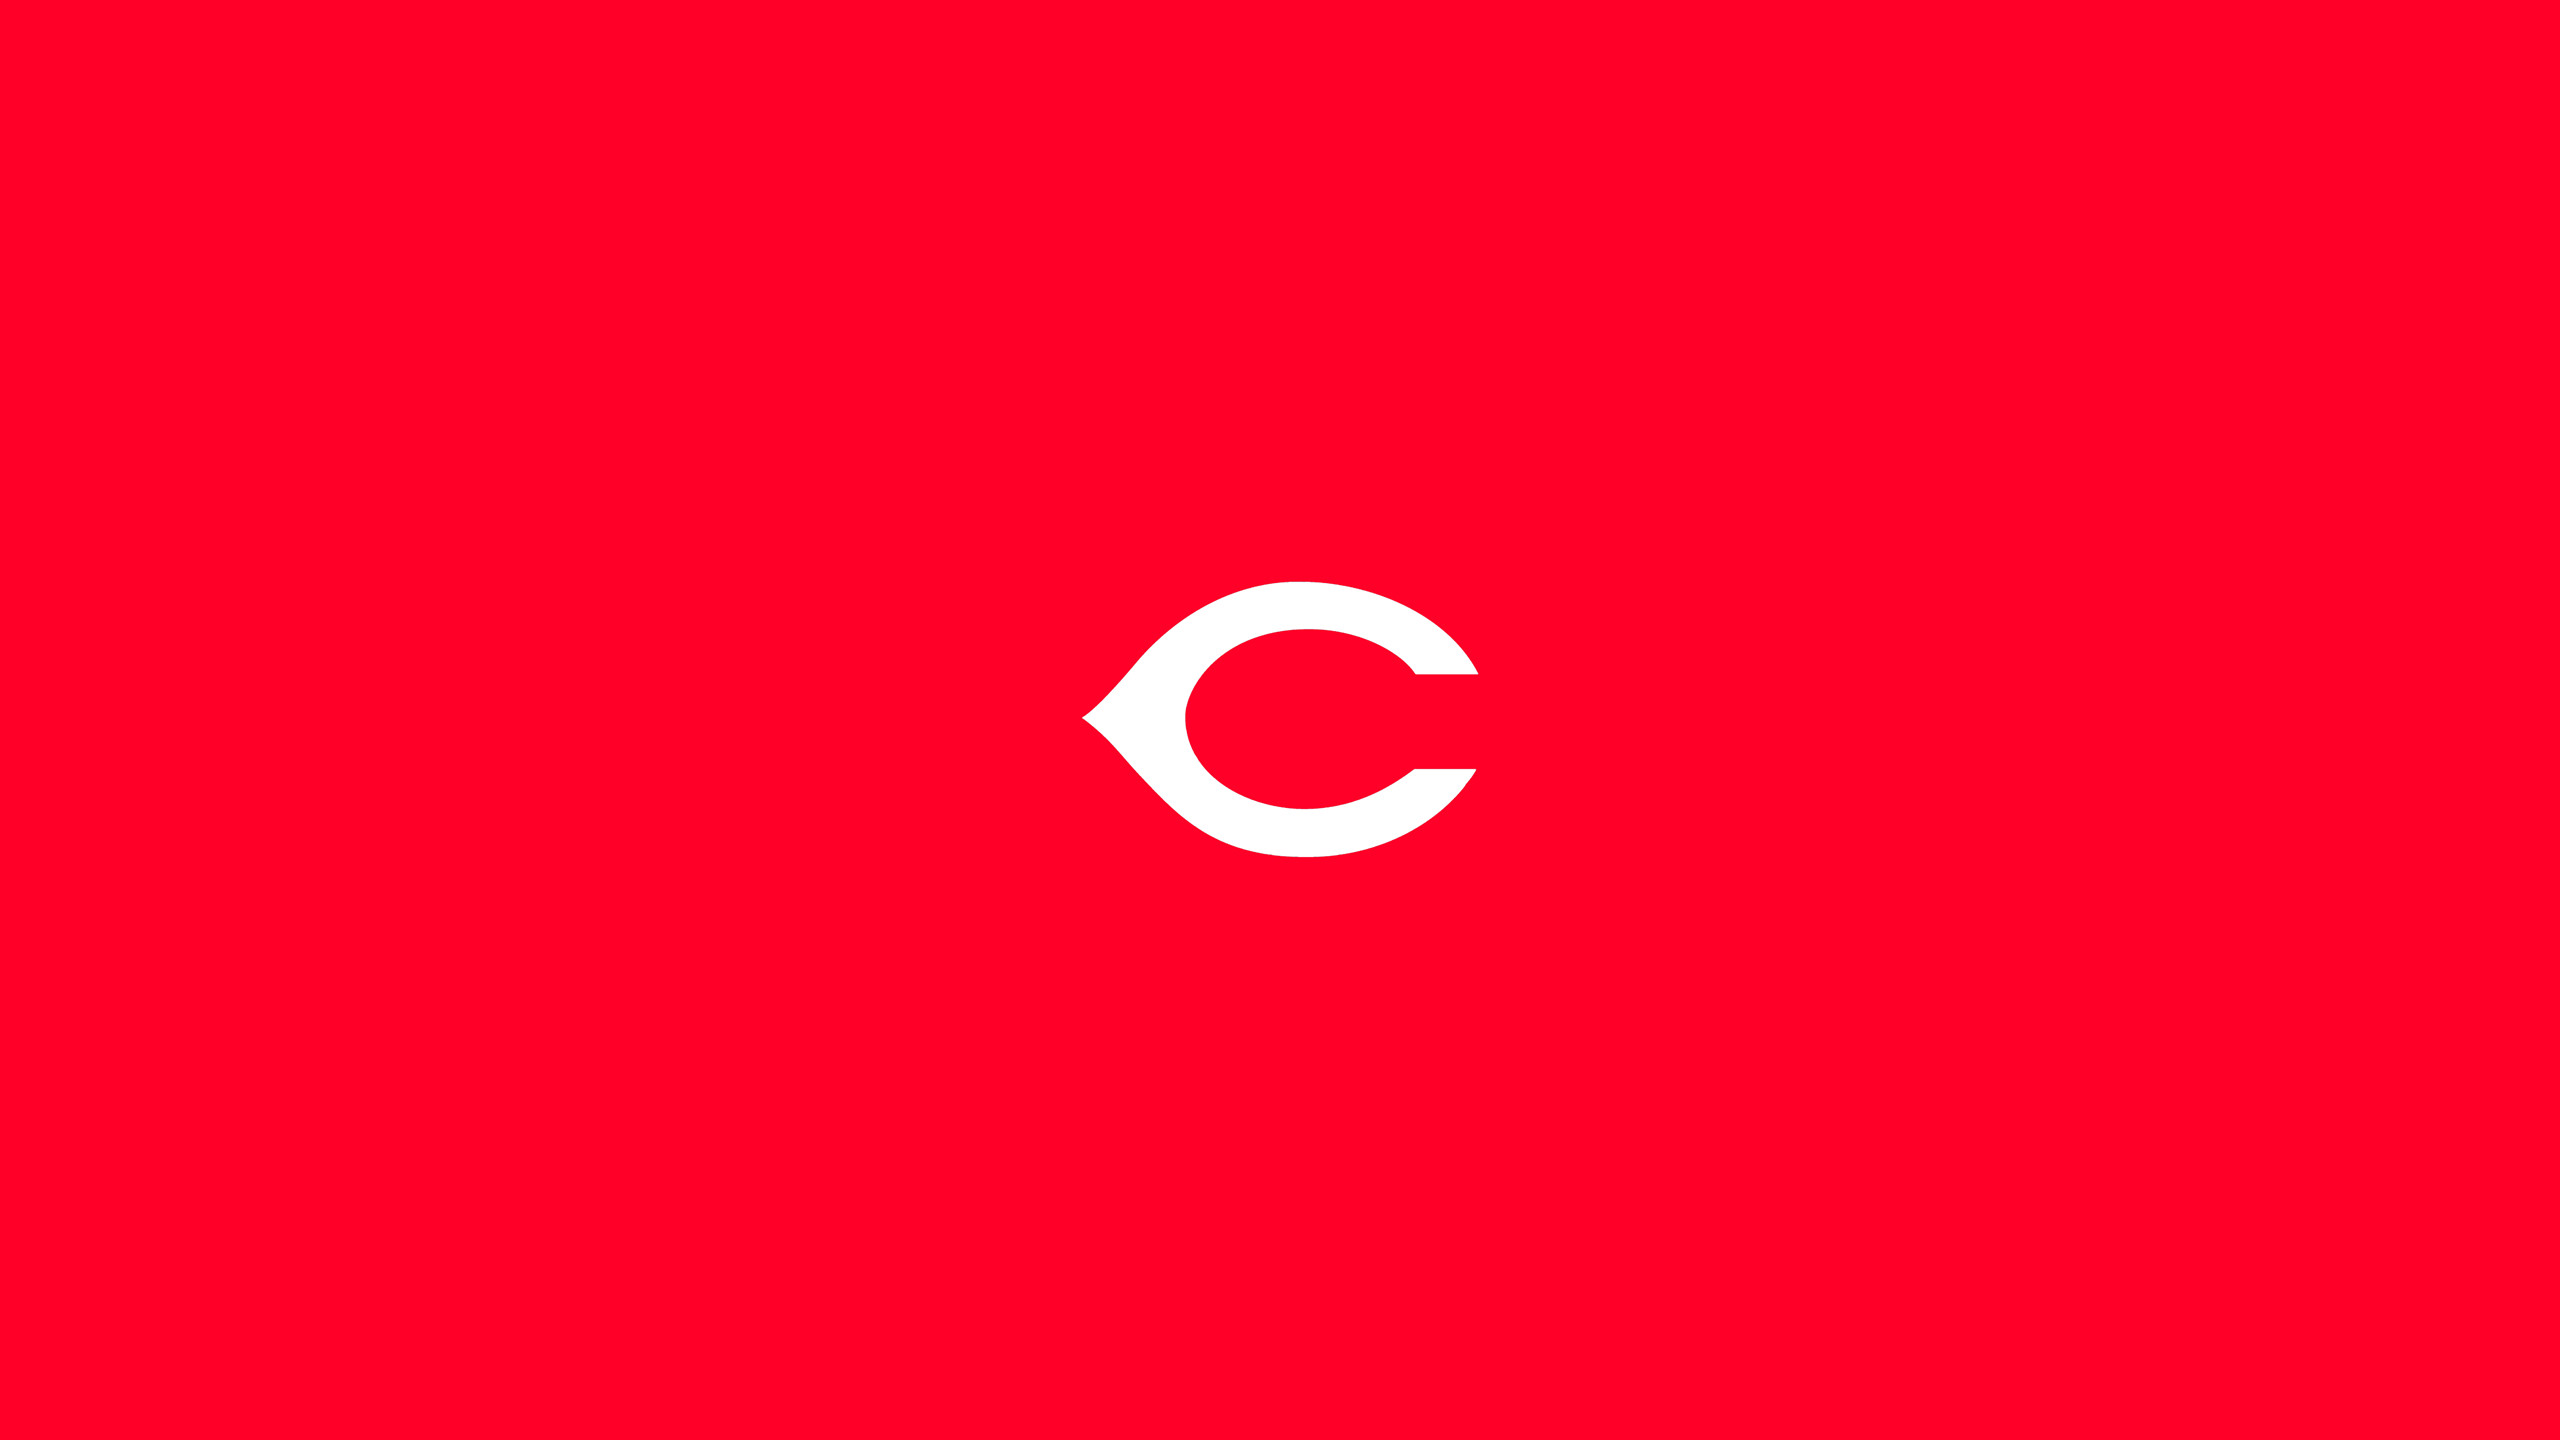 Cincinnati Reds on Twitter Deciding on a wallpaper for your phone  shouldnt be a titanic struggle ThanksMarty  WallpaperWednesday  httpstcoDx8Pca9O5Y  Twitter